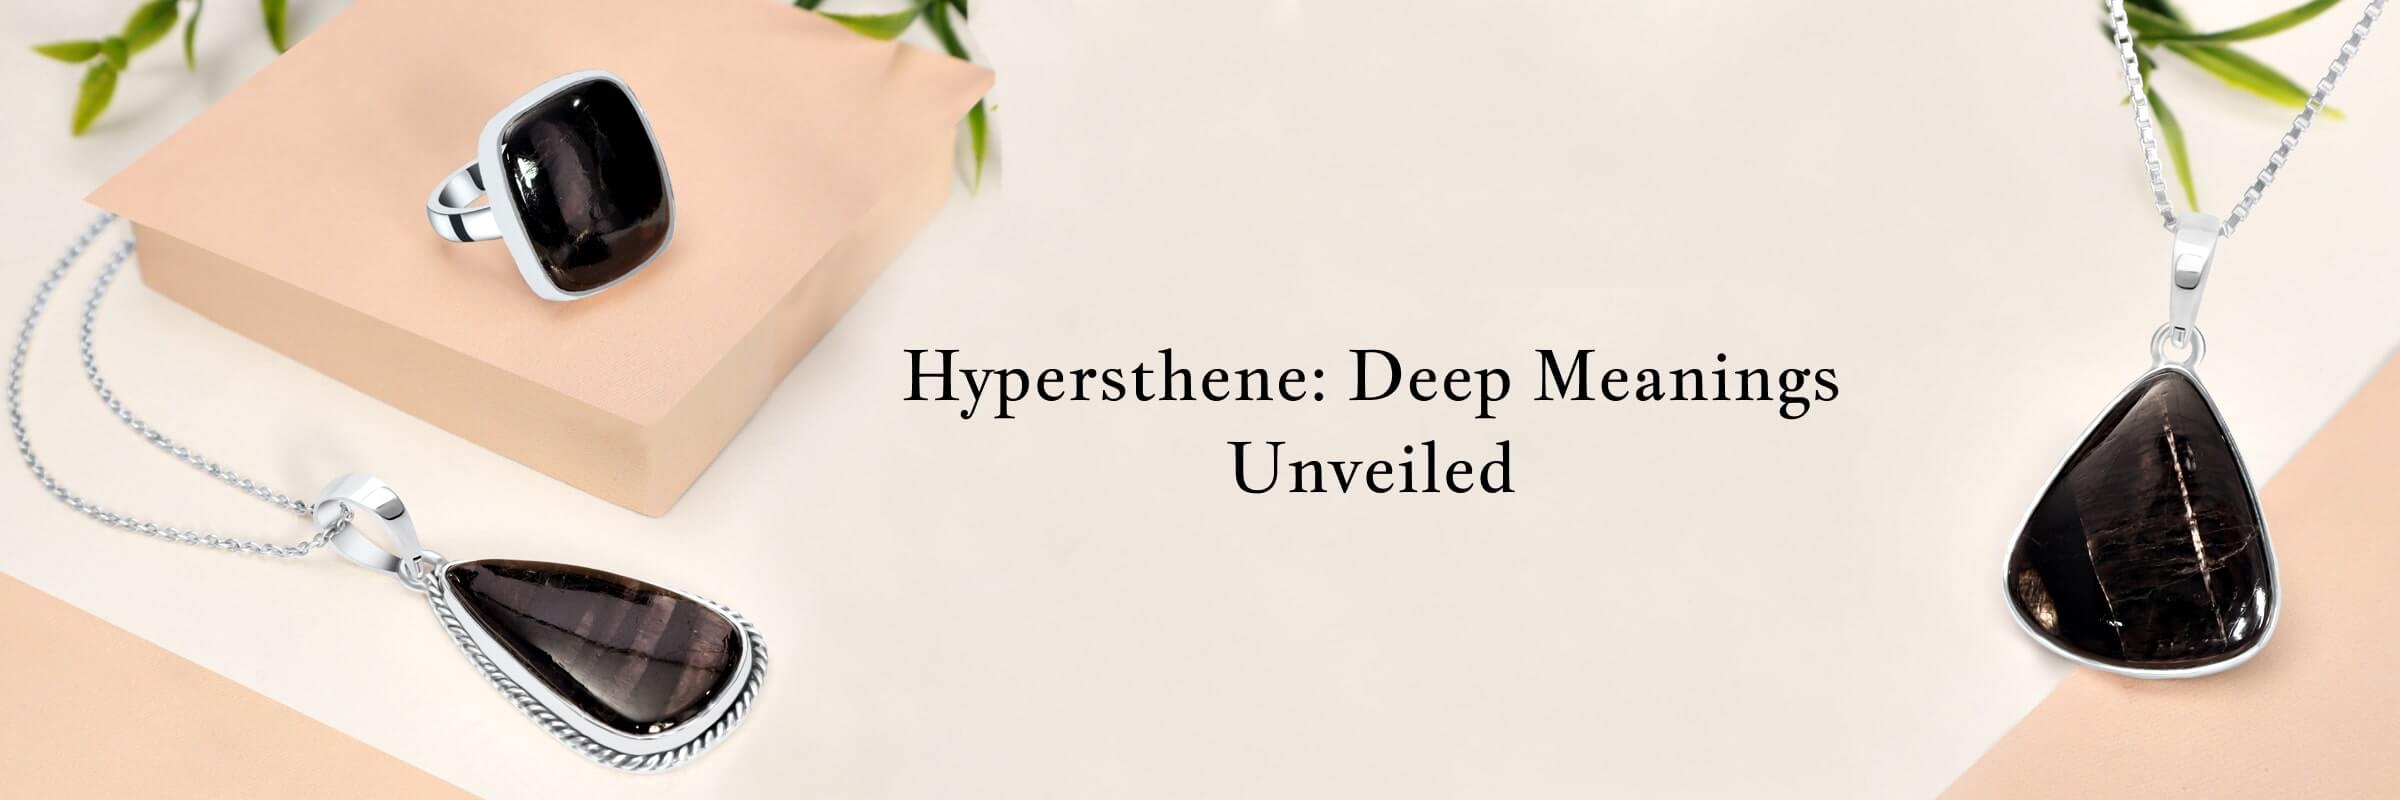 Meaning of Hypersthene